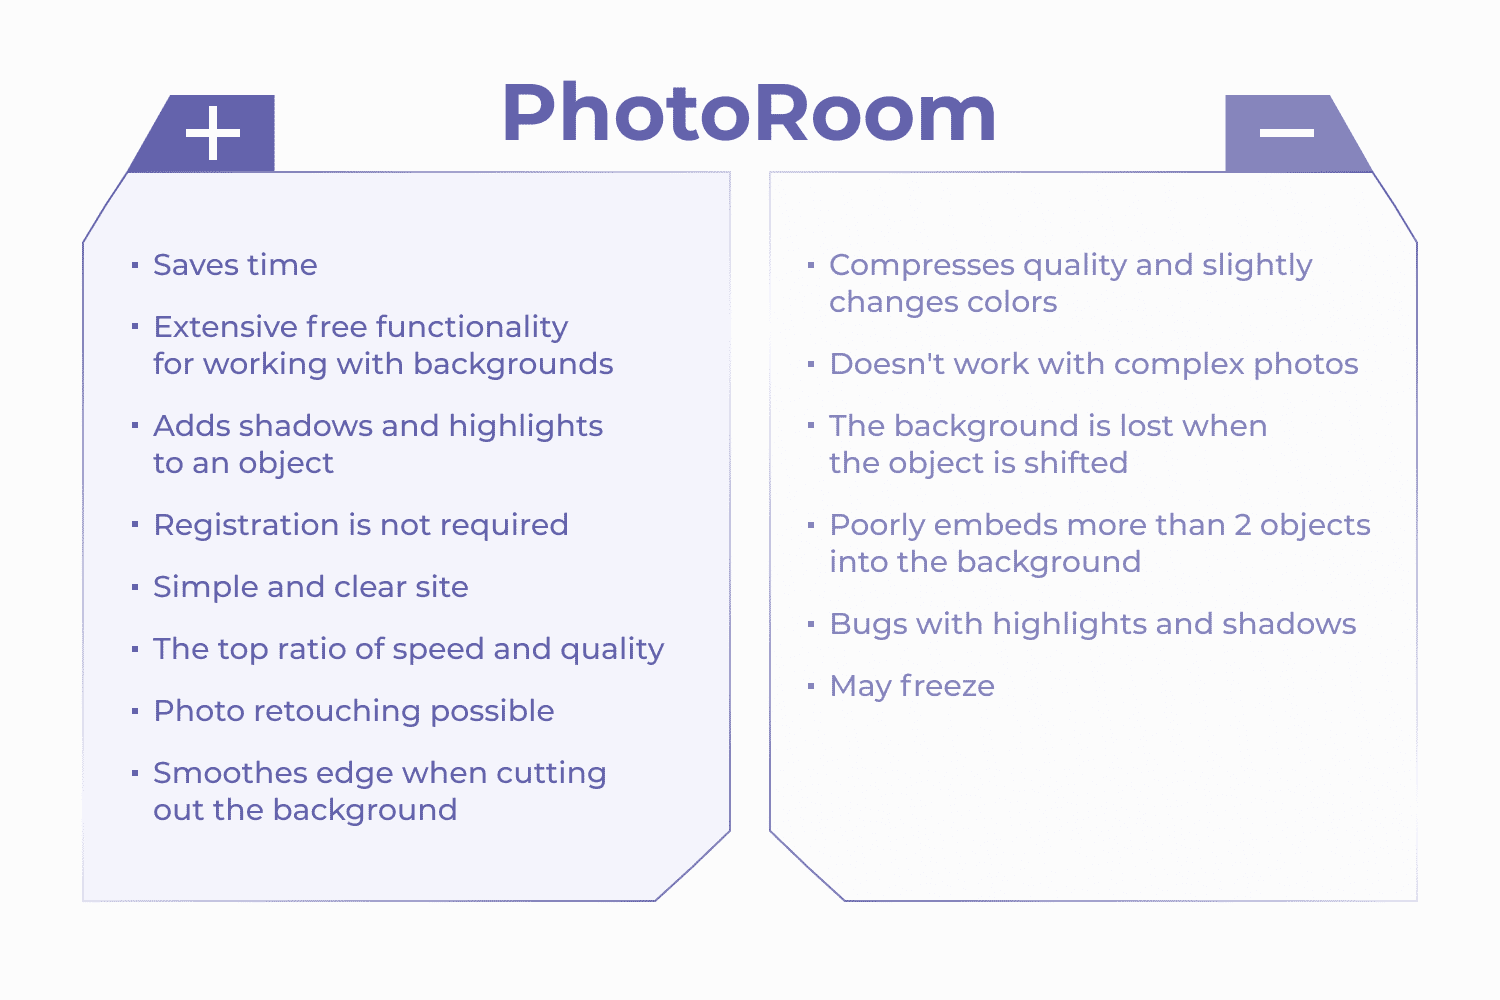 Table of advantages and disadvantages of the Photoroom neural network.